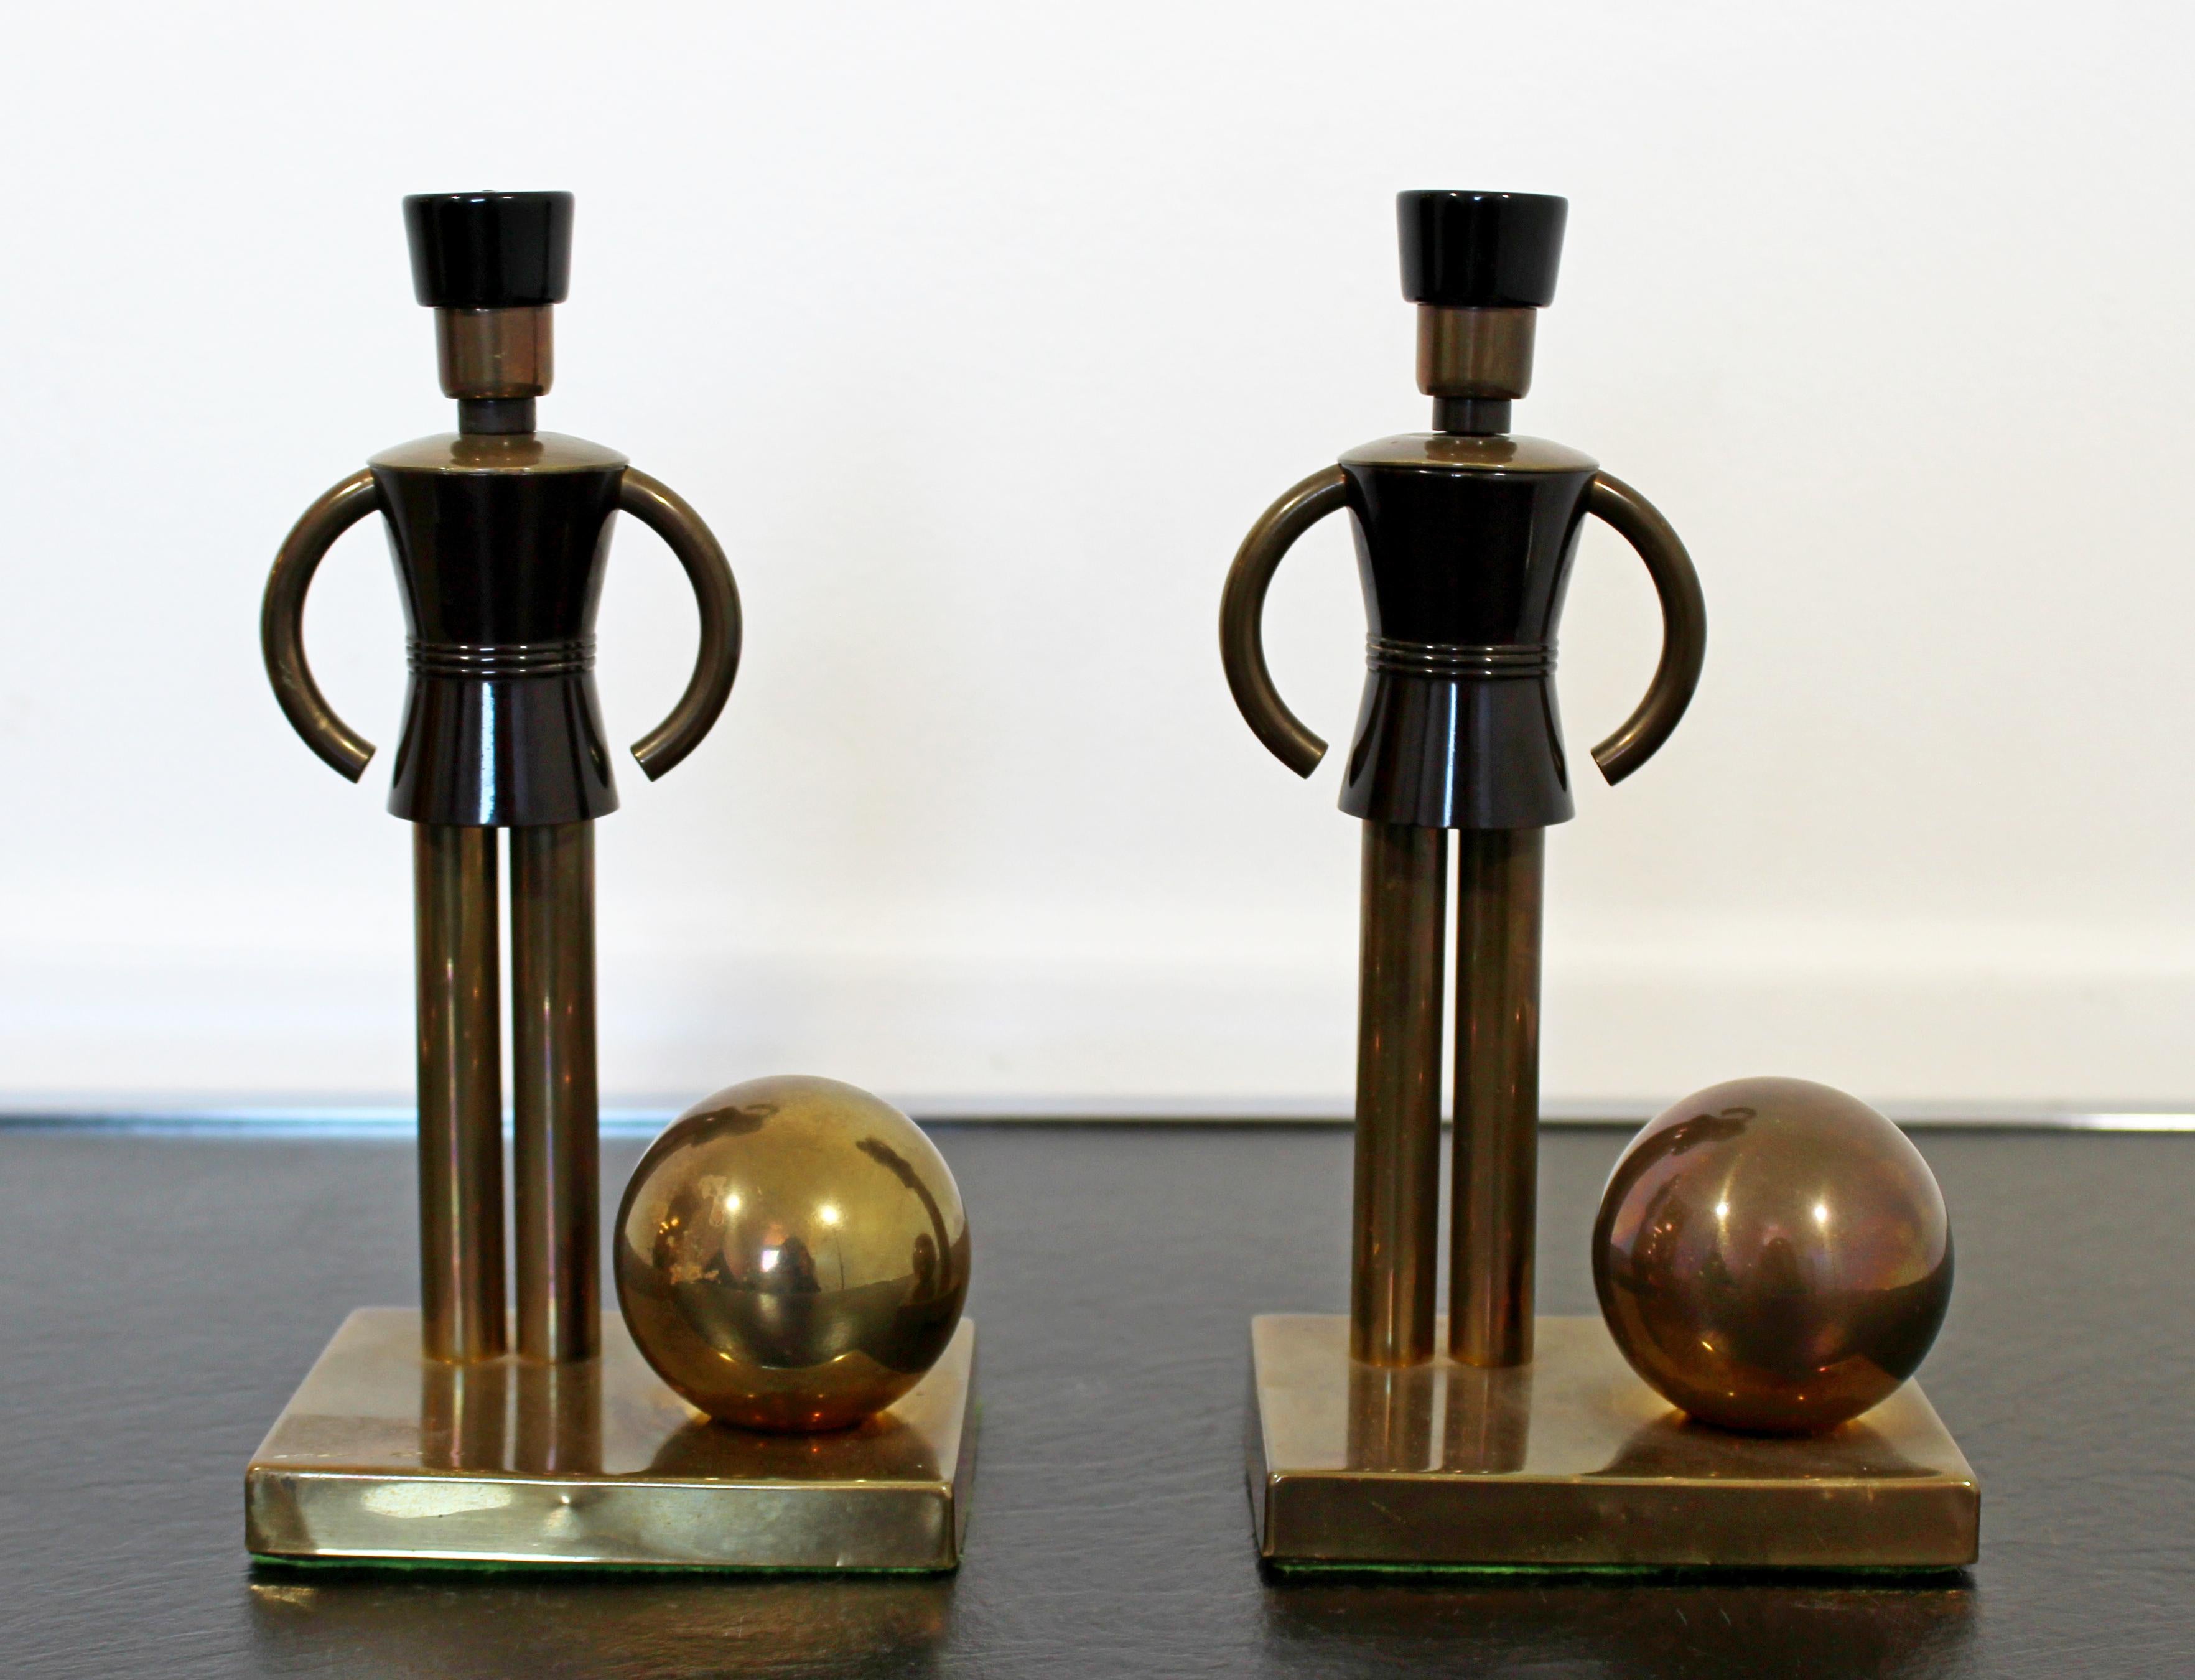 For your consideration is a fantastic pair of brass and Bakelite bookends, toys for chase, by Walter Von Nessen. In very good vintage condition, with a patina to match the age. The dimensions of each are 4